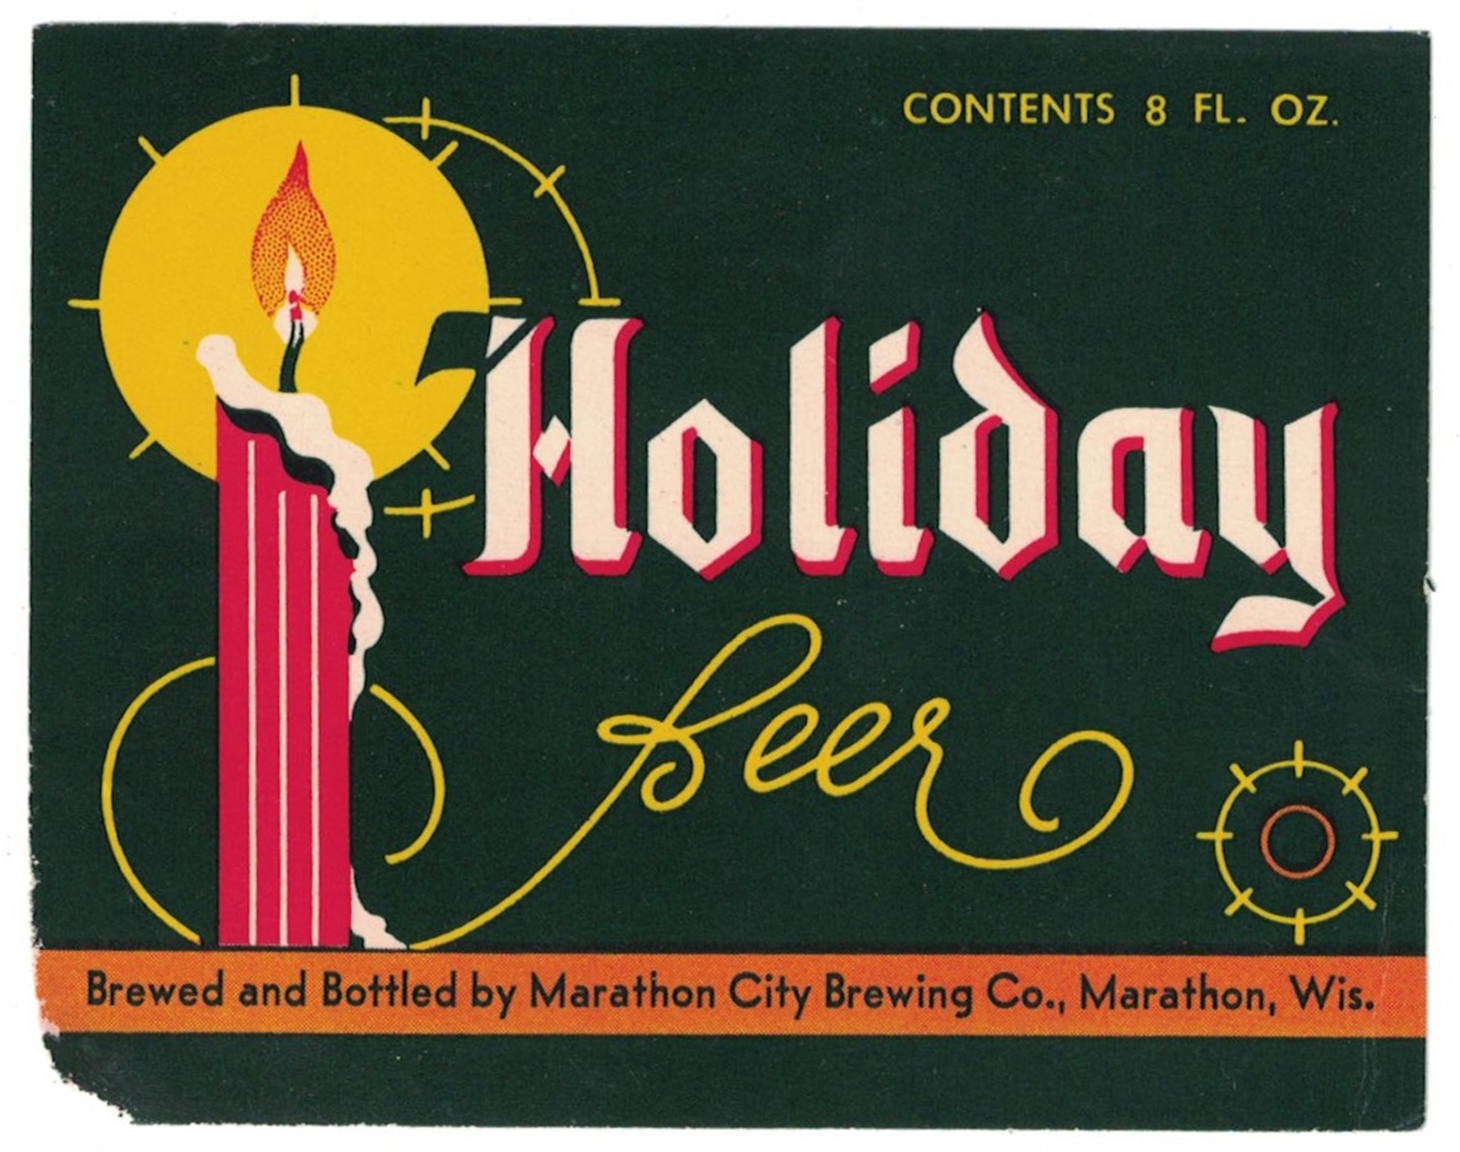 Holiday Beer Label